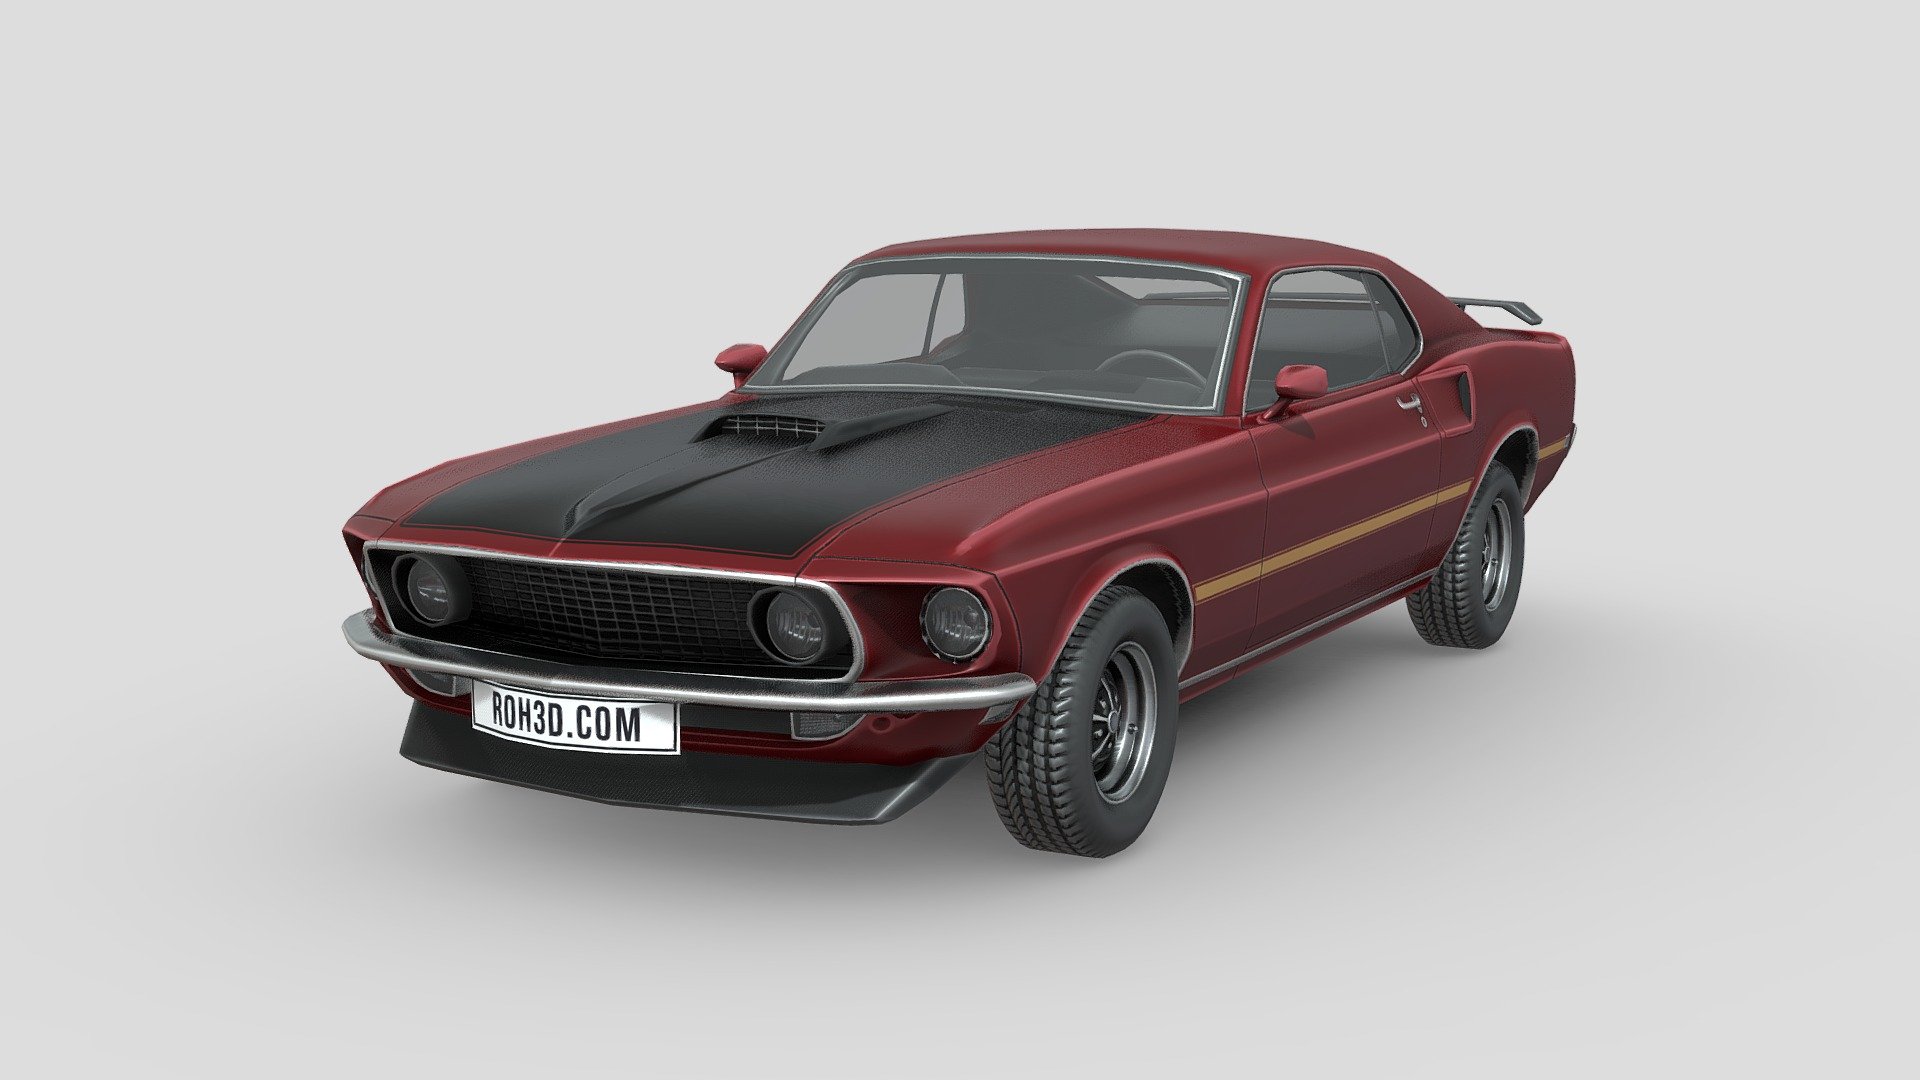 Low Poly Ford Mustang Mach 1 351 1969, nice geometry with only 10K polys. It also included PSD files, so you can easily change the color.

The Ford Mustang Mach 1 is a performance-oriented option package of the Ford Mustang muscle car, originally introduced in August 1968 for the 1969 model year. It was available until 1978, returned briefly in 2003, 2004, and most recently 2021.

As part of a Ford heritage program, the Mach 1 package returned in 2003 as a high-performance version of the New Edge platform. Visual connections to the 1969 model were integrated into the design to pay homage to the original. This generation of the Mach 1 was discontinued after the 2004 model year, with the introduction of the fifth generation Mustang.

Ford first used the name &ldquo;Mach 1